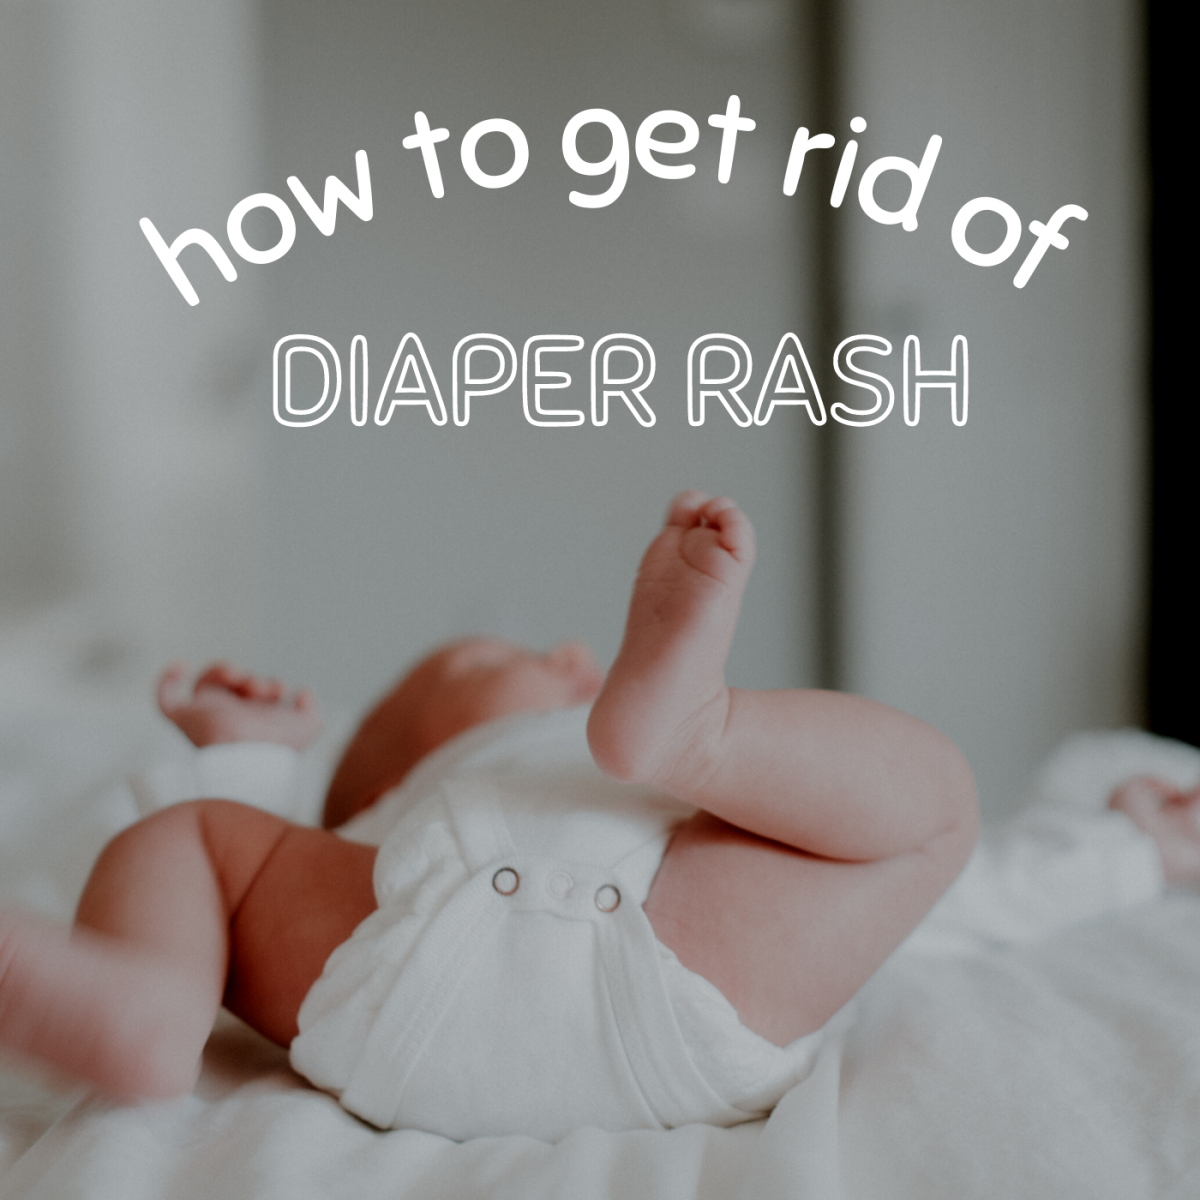 How to Get Rid of a Diaper Rash in 24 Hours or Less